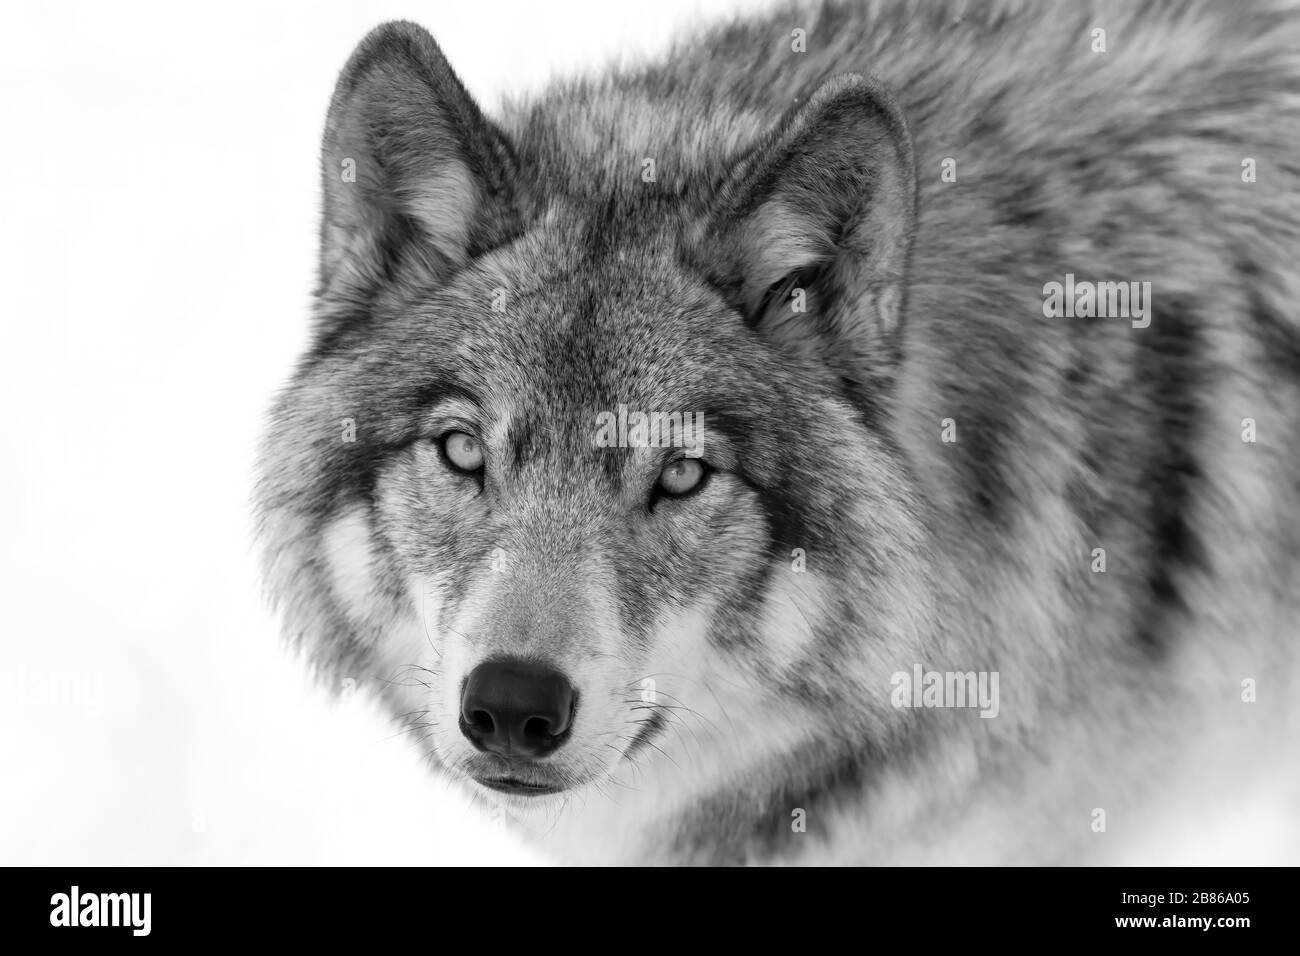 Timber Wolf or Grey Wolf Canis lupus portrait in black and white ...